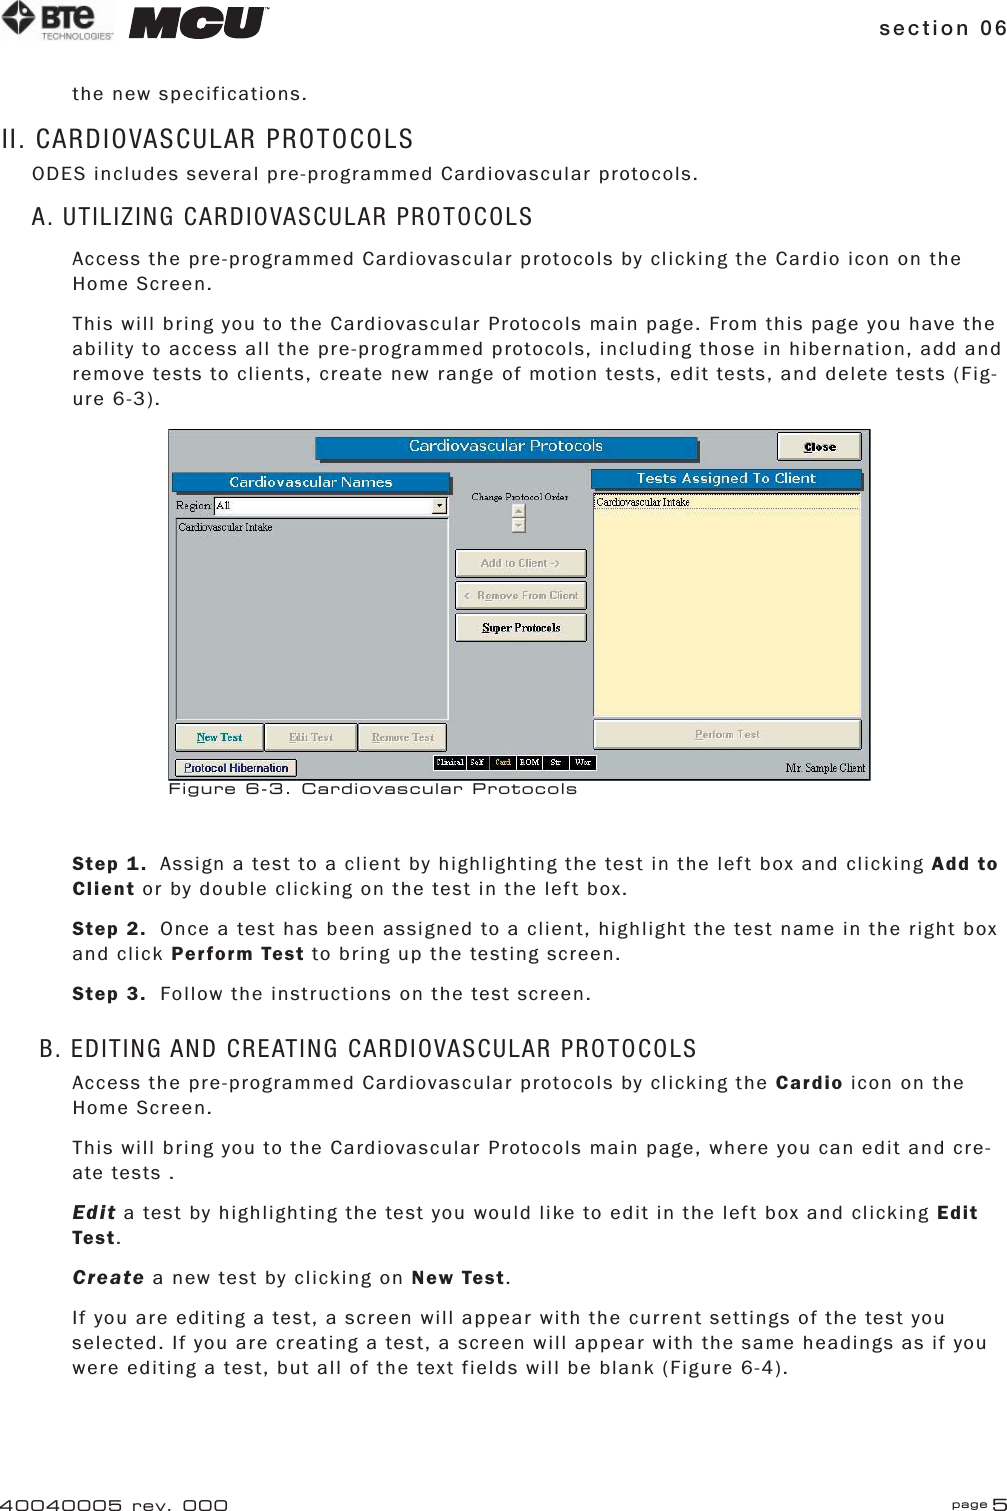 section 06 page 540040005 rev. 000the new specifications.II. CARDIOVASCULAR PROTOCOLSODES includes several pre-programmed Cardiovascular protocols.A. UTILIZING CARDIOVASCULAR PROTOCOLSAccess the pre-programmed Cardiovascular protocols by clicking the Cardio icon on the Home Screen.This will bring you to the Cardiovascular Protocols main page. From this page you have the ability to access all the pre-programmed protocols, including those in hibernation, add and remove tests to clients, create new range of motion tests, edit tests, and delete tests (Fig-ure 6-3).Step 1.  Assign a test to a client by highlighting the test in the left box and clicking Add to Client or by double clicking on the test in the left box.Step 2.  Once a test has been assigned to a client, highlight the test name in the right box and click Perform Test to bring up the testing screen.Step 3.  Follow the instructions on the test screen.B. EDITING AND CREATING CARDIOVASCULAR PROTOCOLSAccess the pre-programmed Cardiovascular protocols by clicking the Cardio icon on the Home Screen.This will bring you to the Cardiovascular Protocols main page, where you can edit and cre-ate tests .Edit a test by highlighting the test you would like to edit in the left box and clicking Edit Test.Create a new test by clicking on New Test.If you are editing a test, a screen will appear with the current settings of the test you selected. If you are creating a test, a screen will appear with the same headings as if you were editing a test, but all of the text fields will be blank (Figure 6-4).Figure 6-3. Cardiovascular Protocols